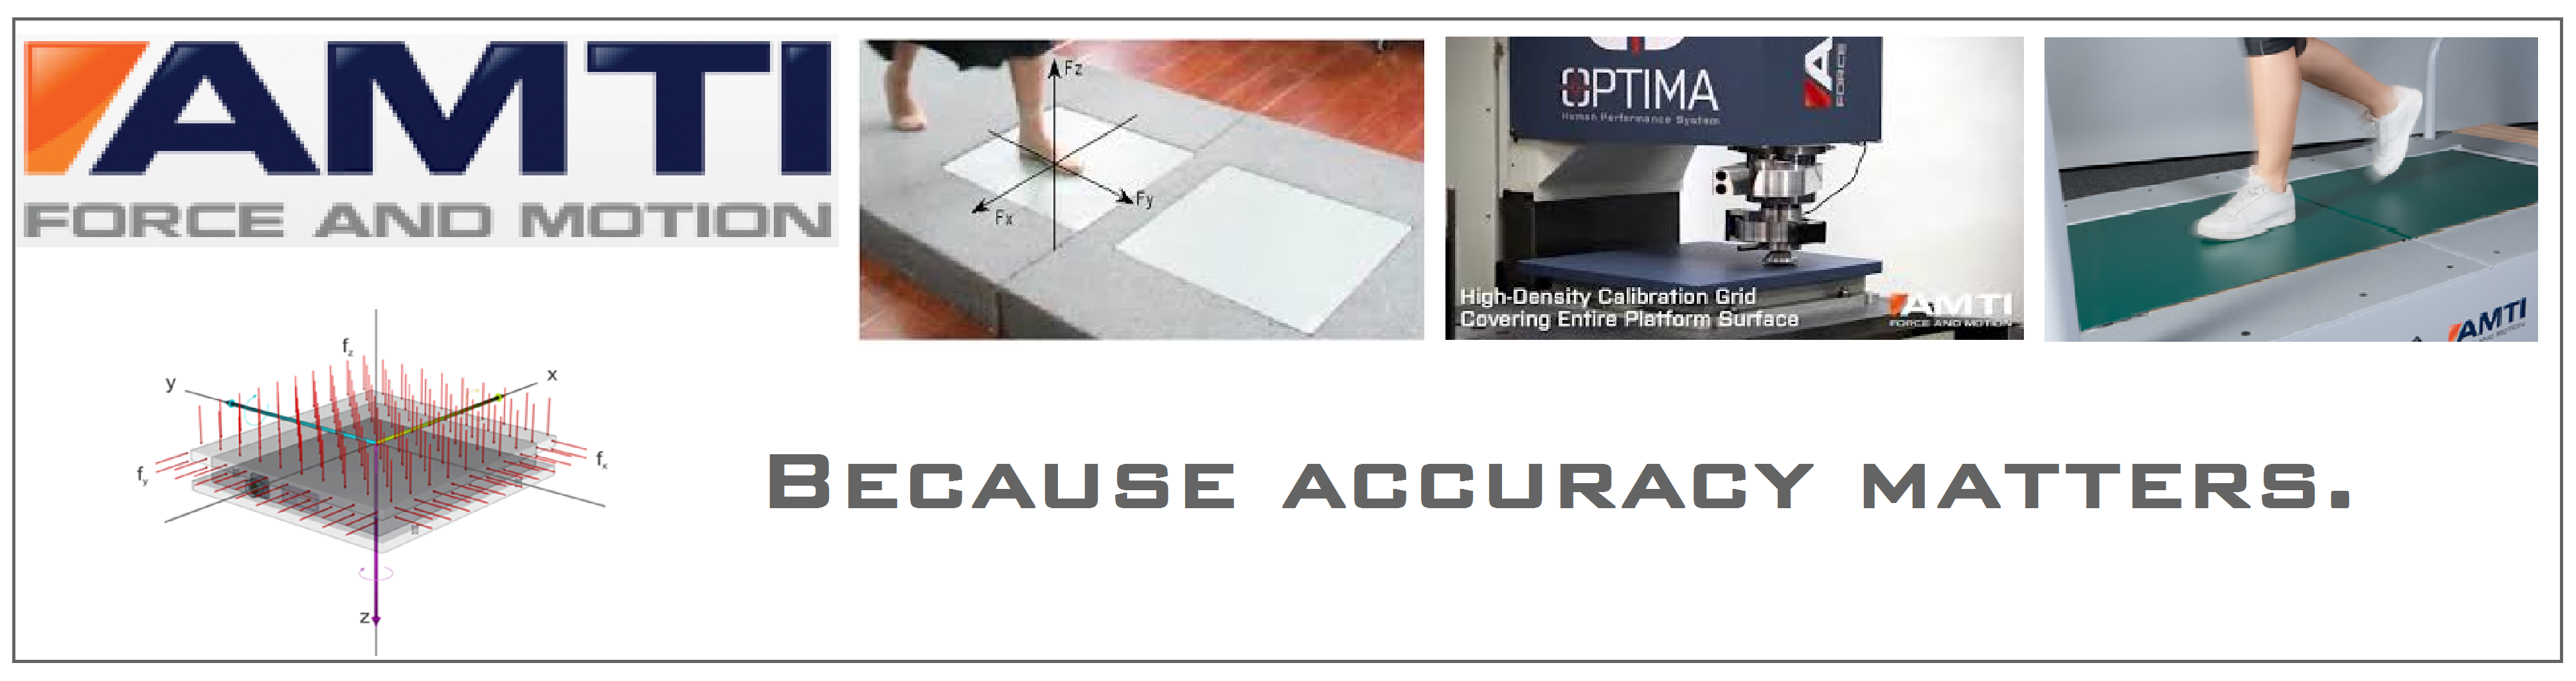 AMTI - Force and Motion: Because accuracy matters.